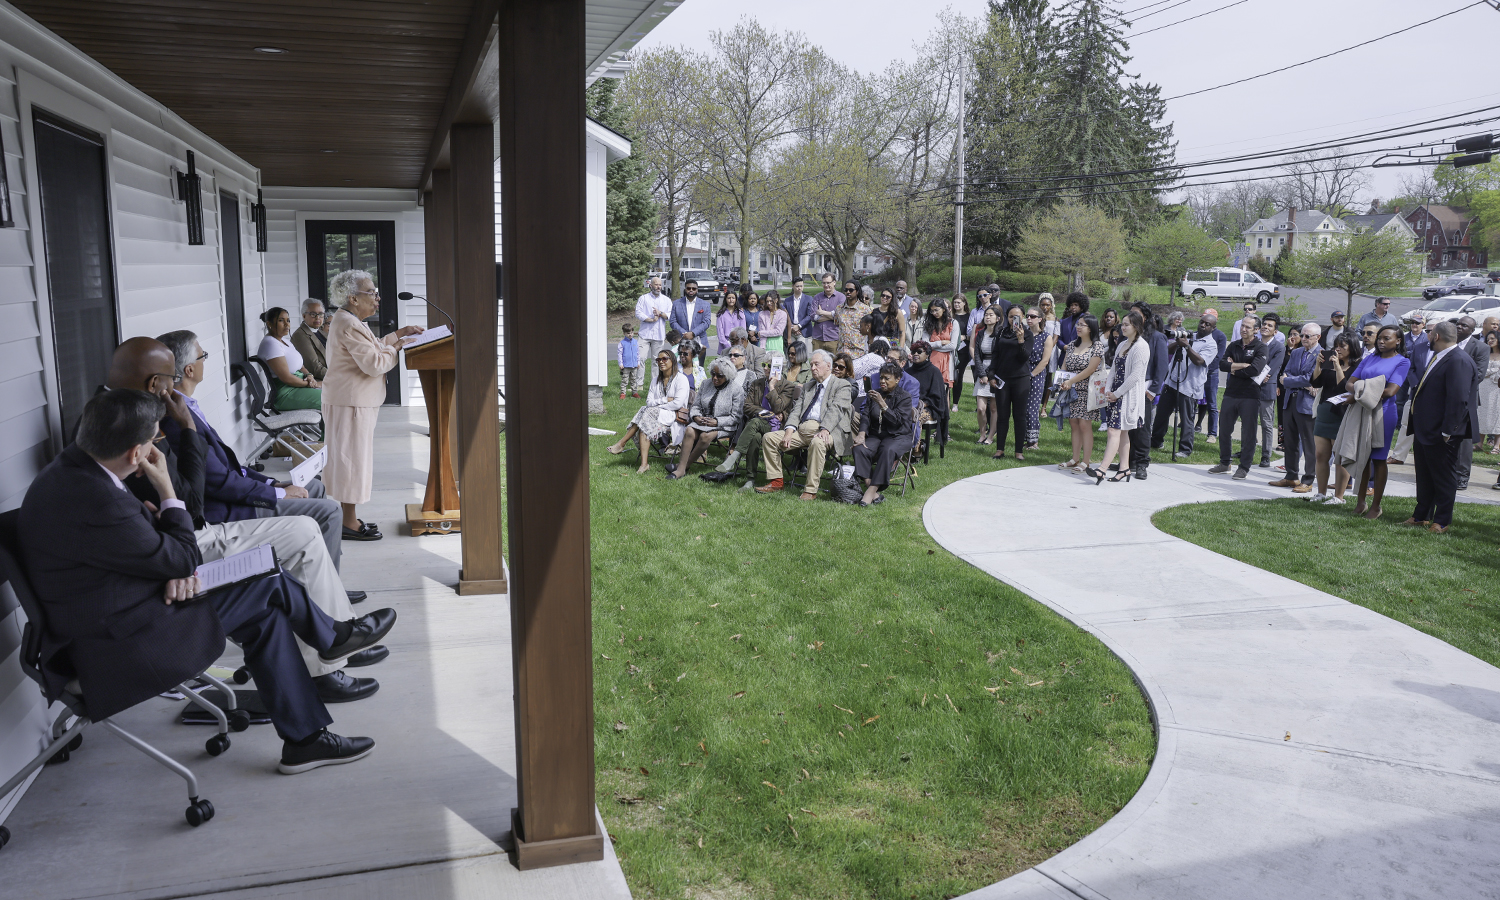 During the official dedication of Adams Intercultural Center, Patricia Adams, daughter of the Rev. Dr. Alger L. Adams ’32, says the opening of the center “is about the future, looking forward, and building on existing good work.”